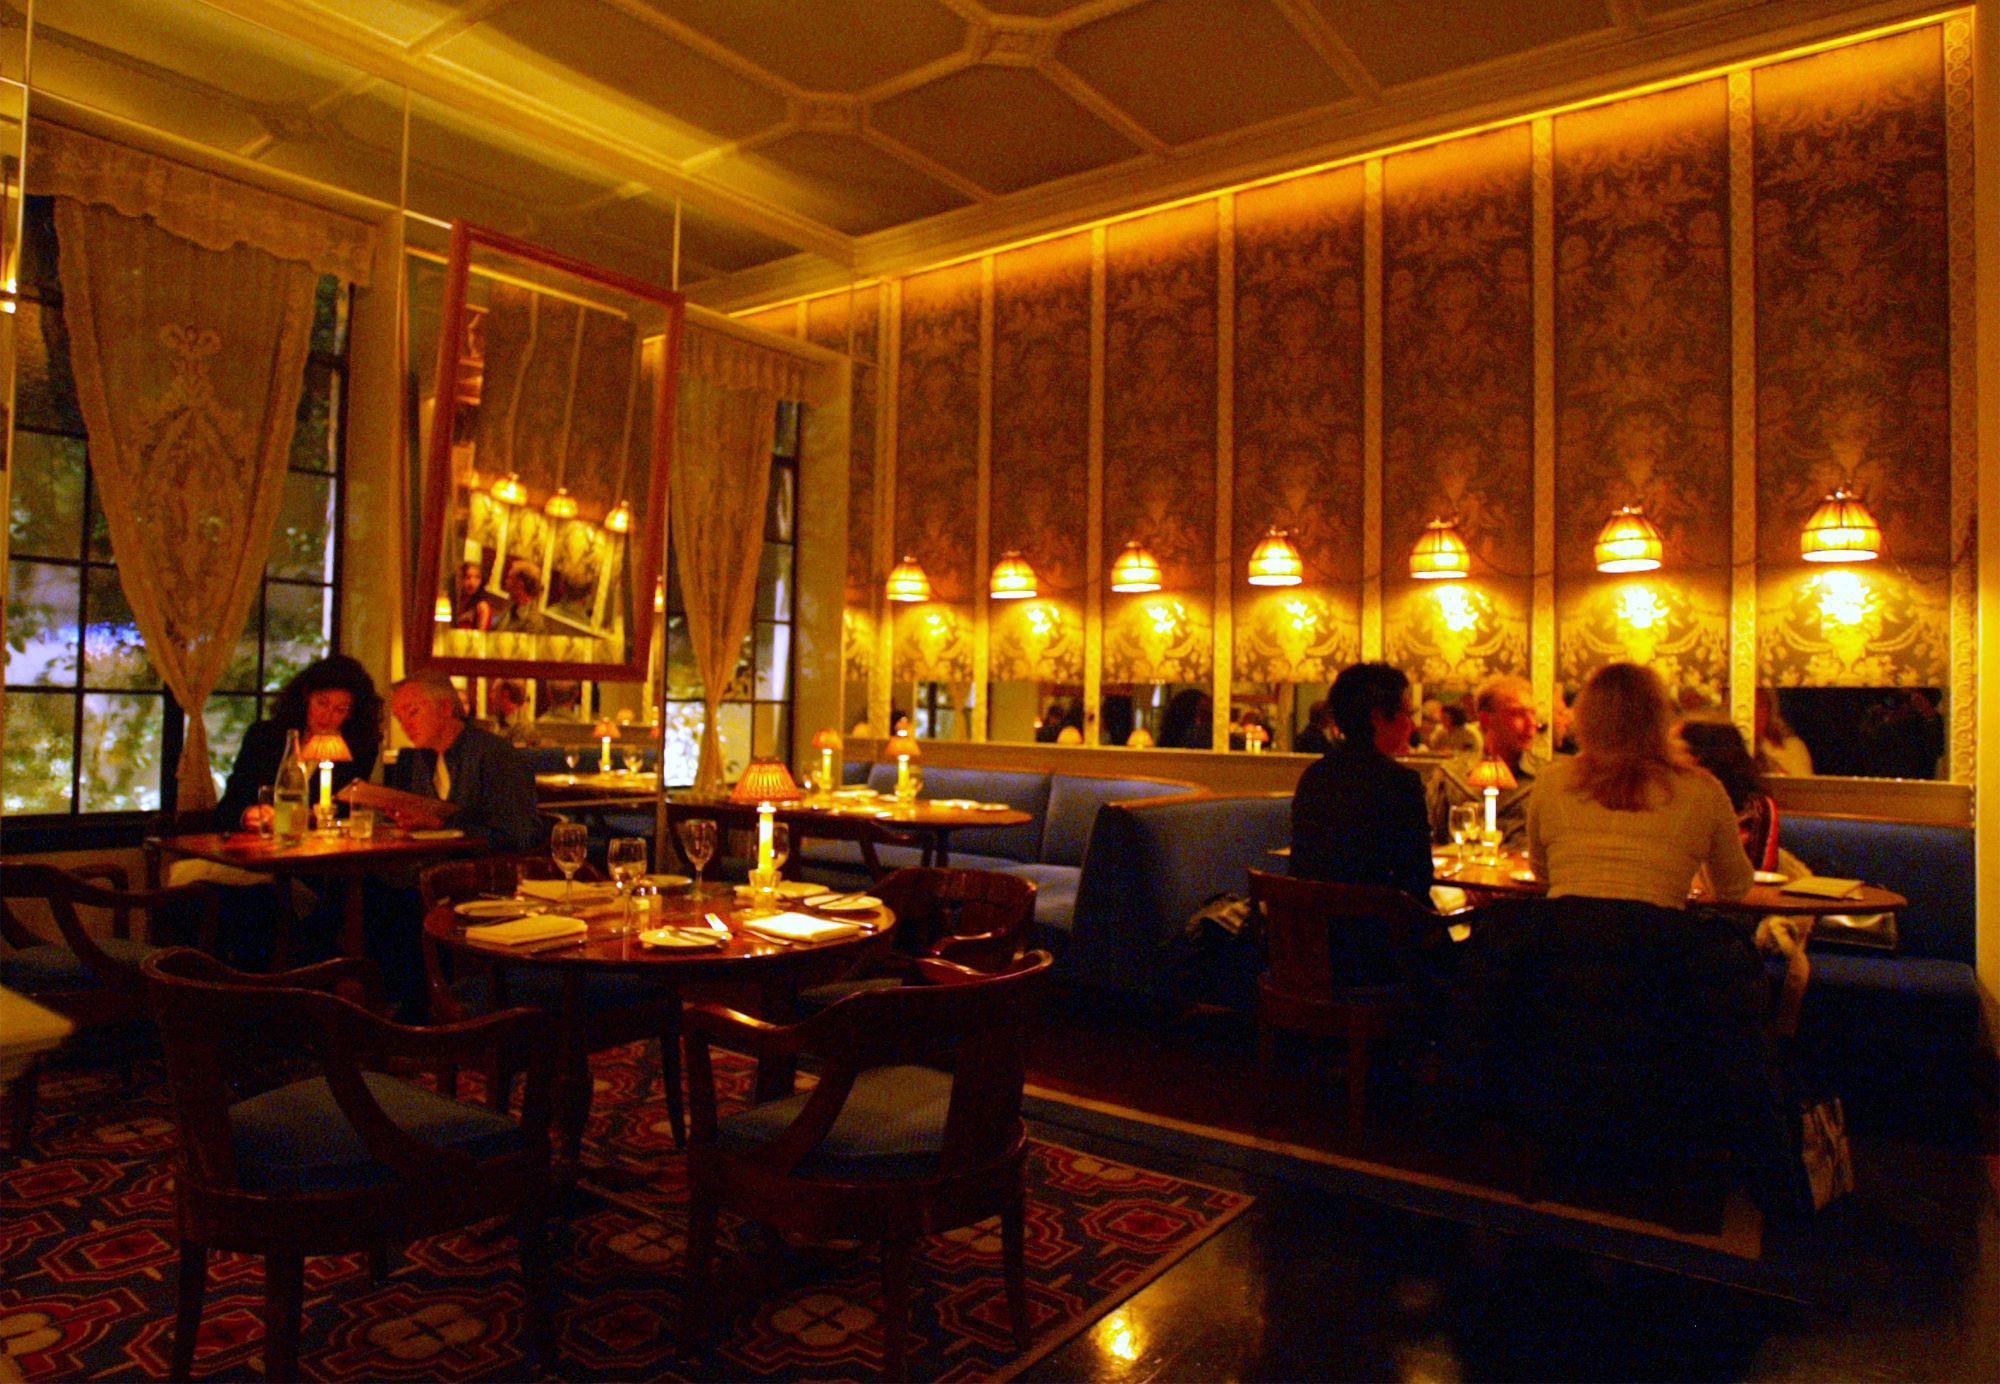 The Chateau Marmont dining room and restaurant in West Hollywood